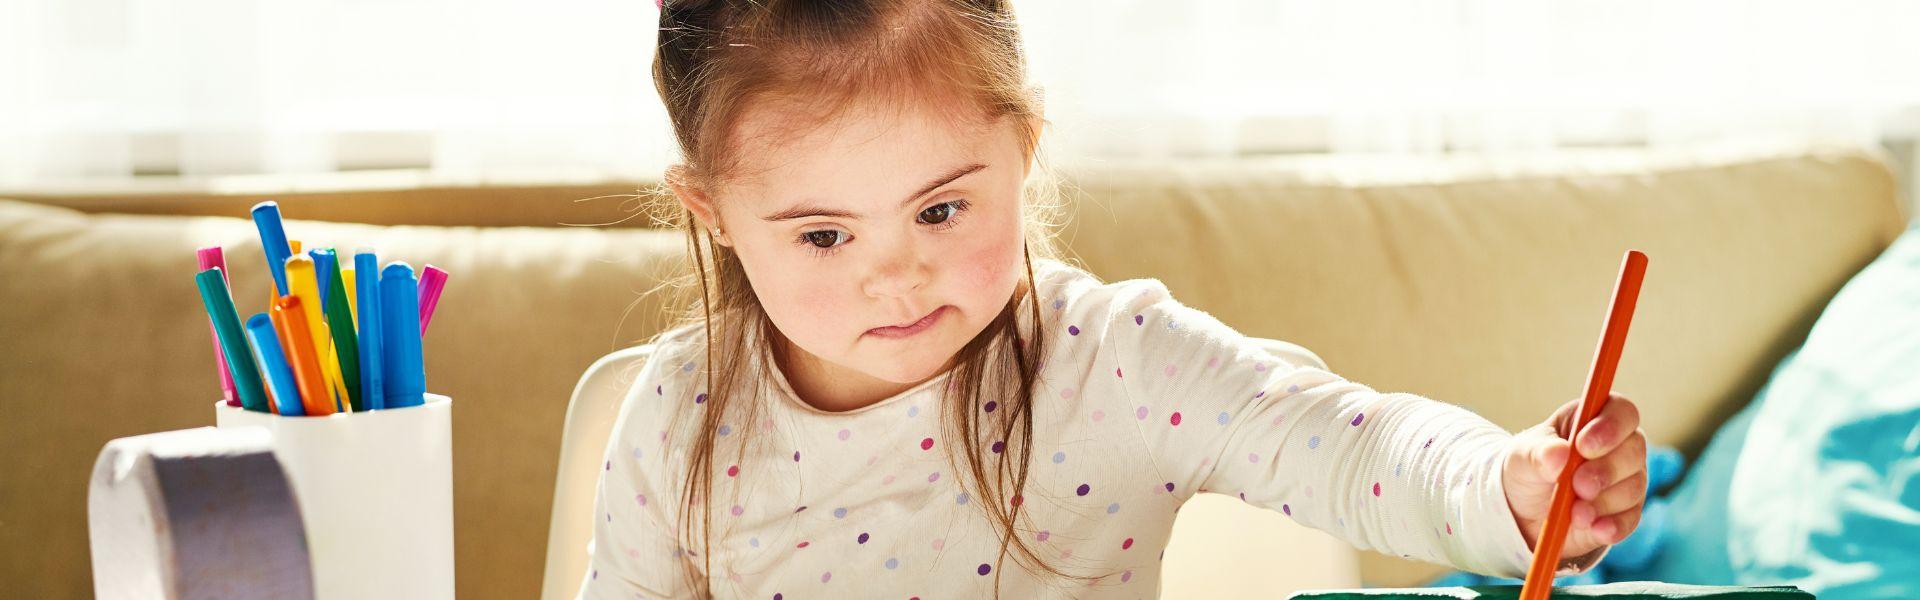 Little girl with Down Syndrome